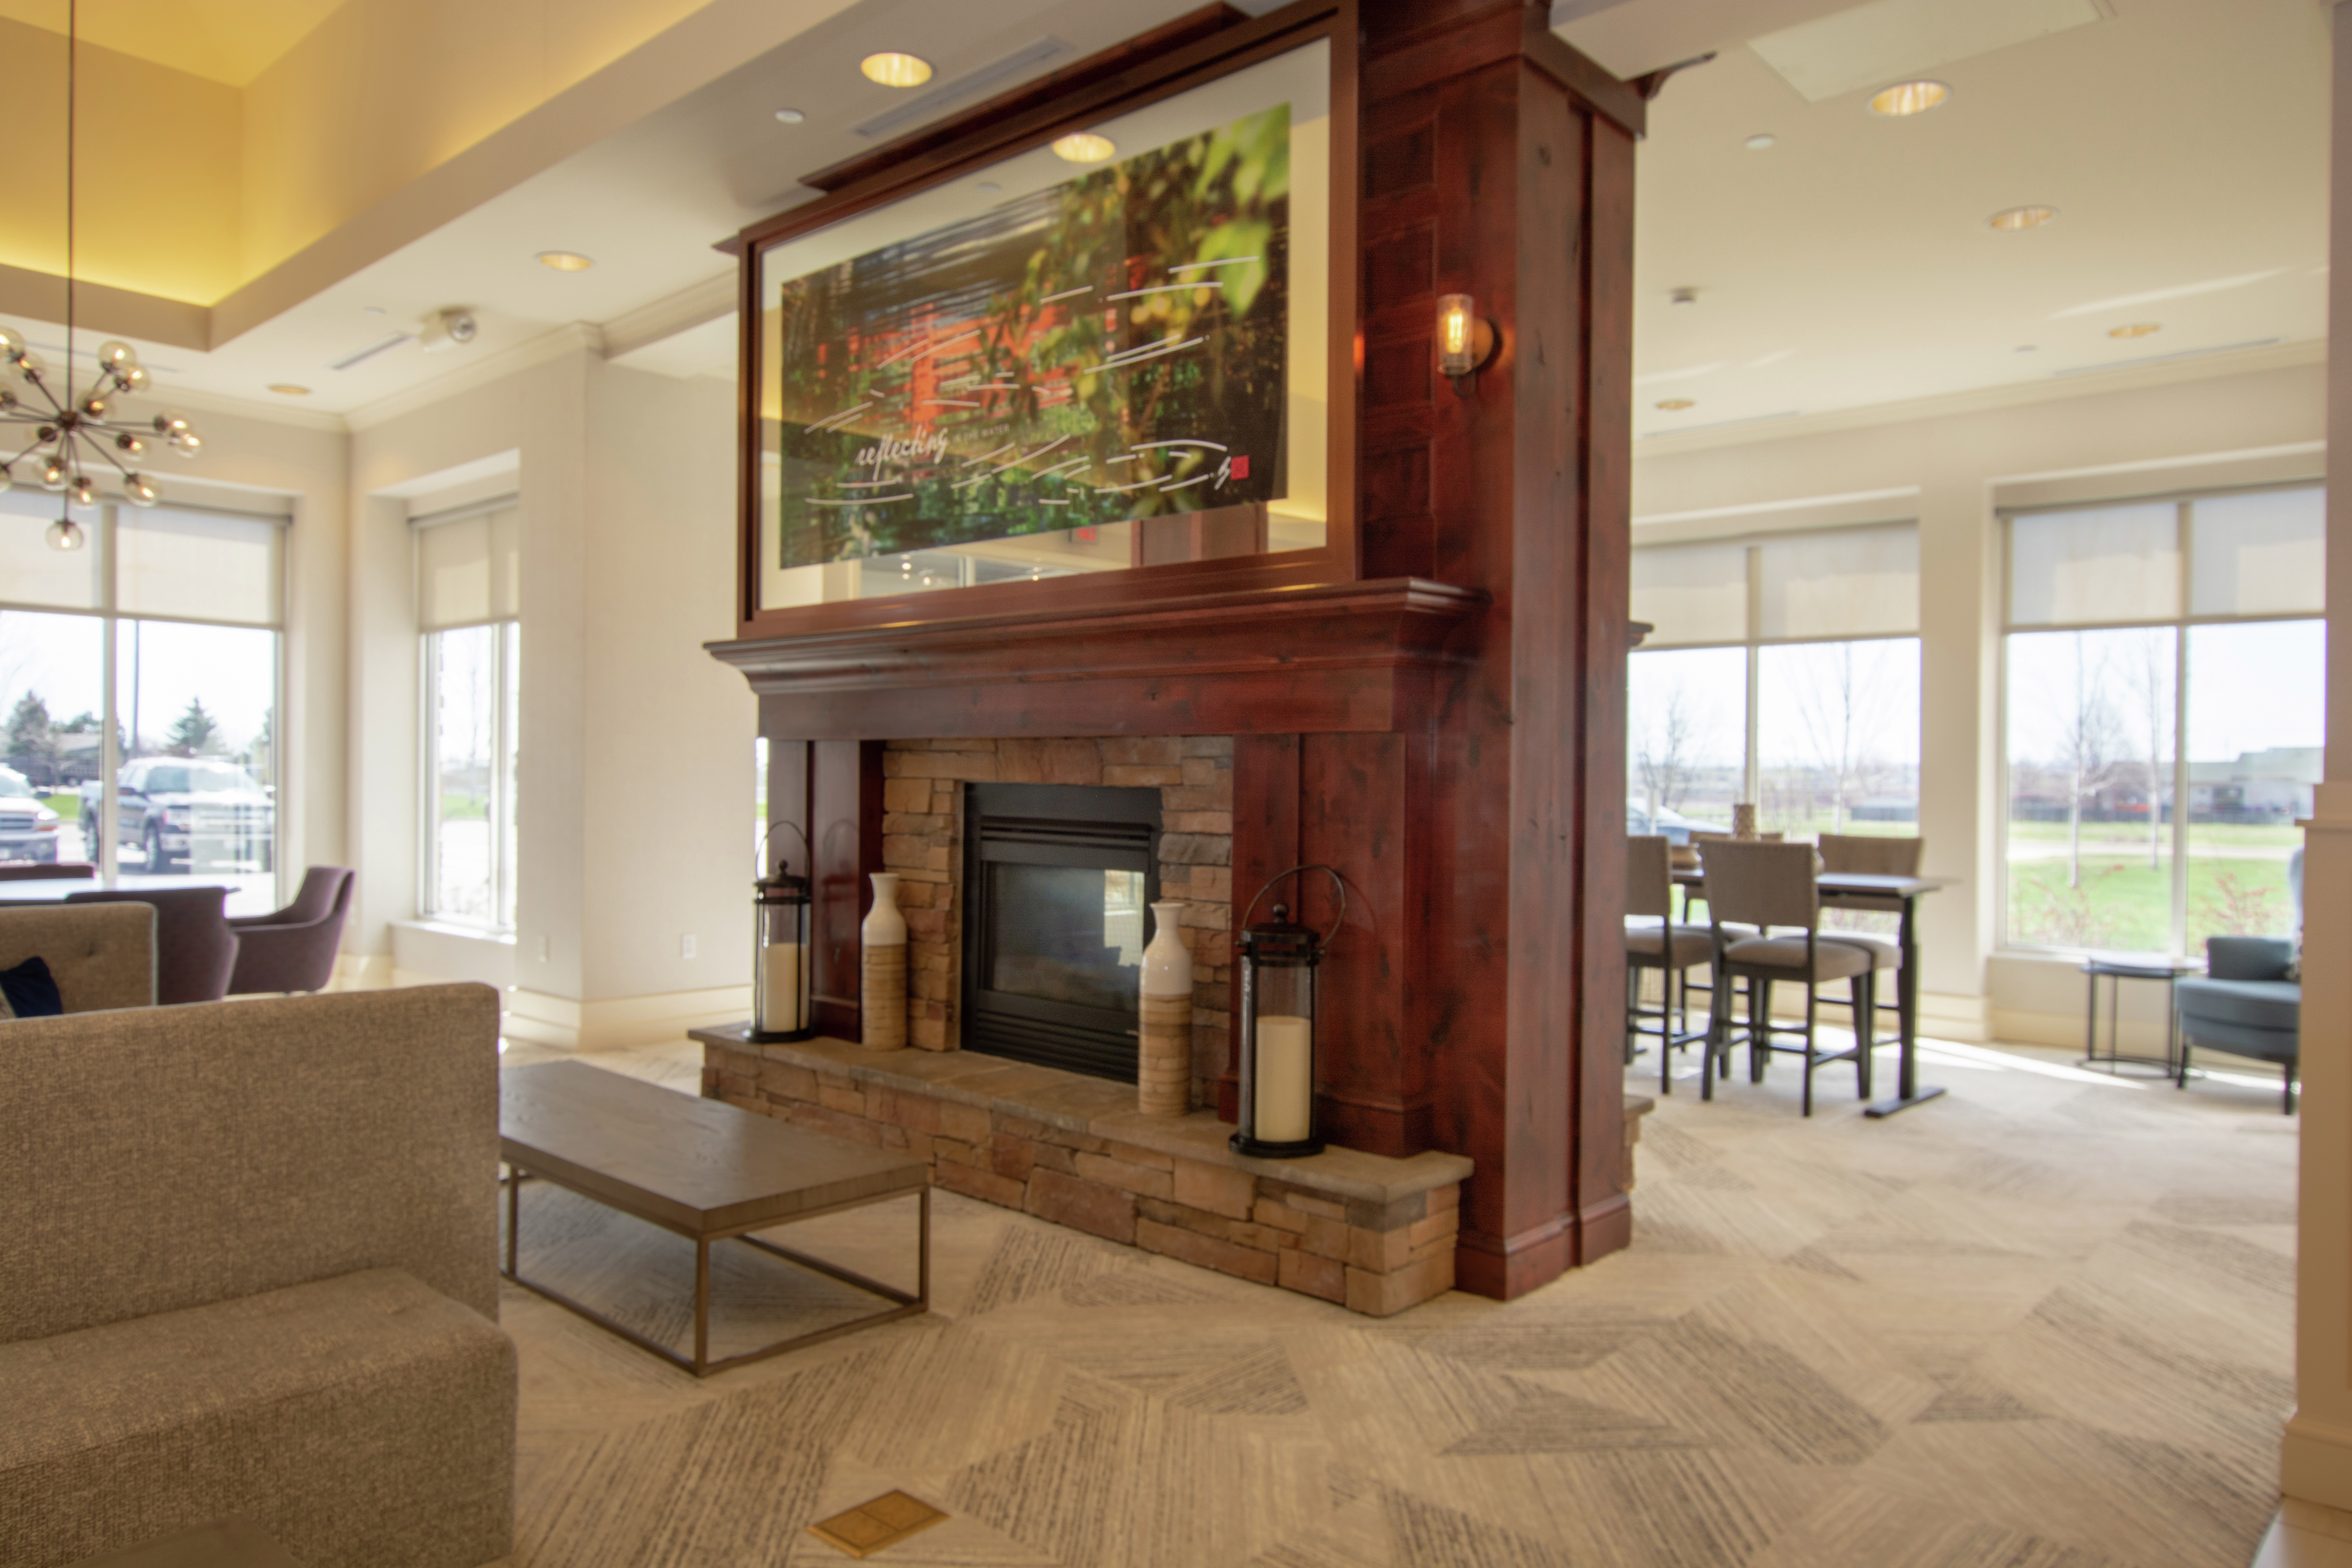 Lobby Seating And Fireplace